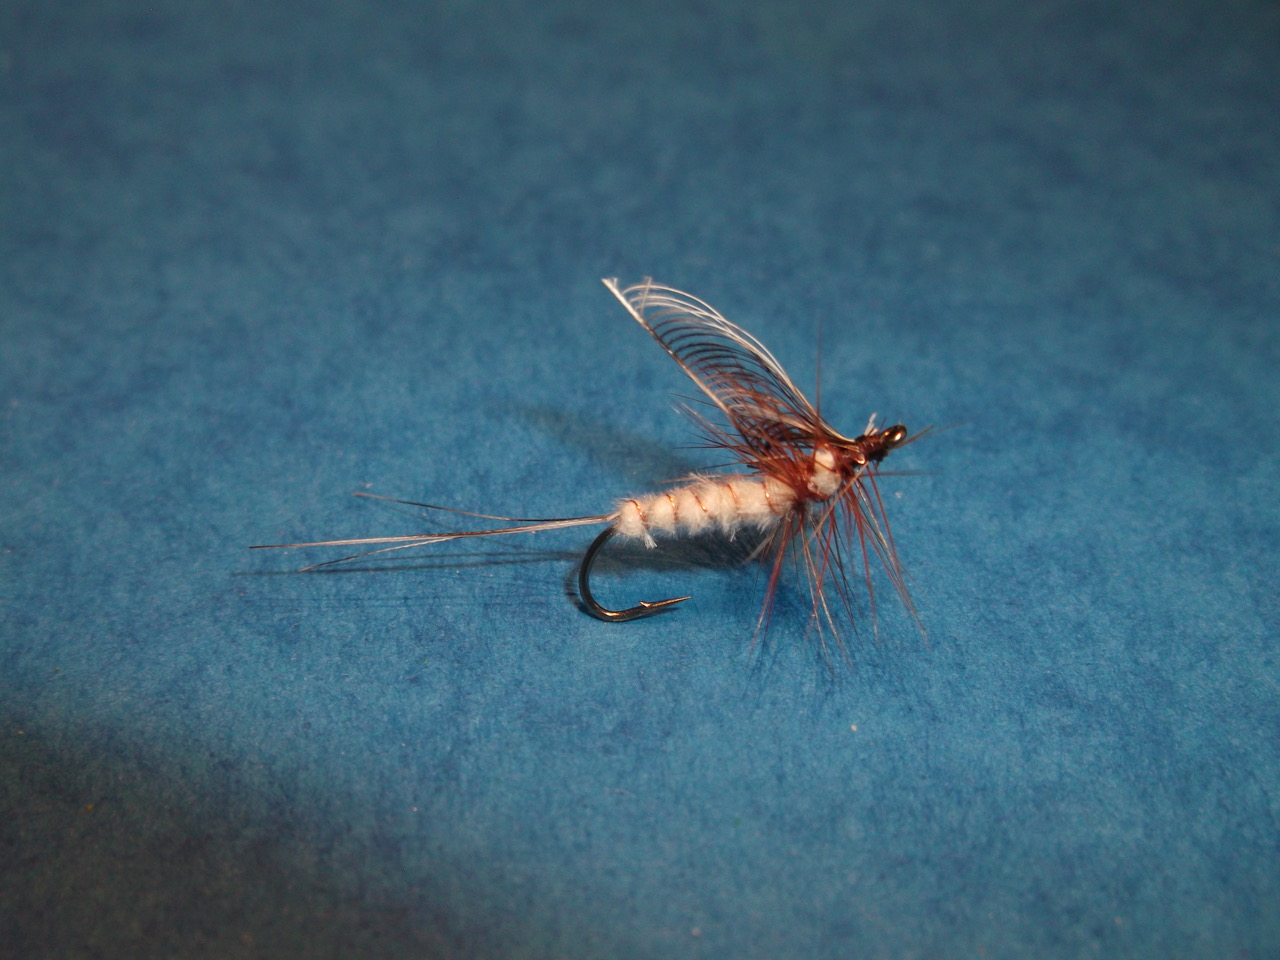 Mouche de mai Mayfly fly tying flytying eclosion